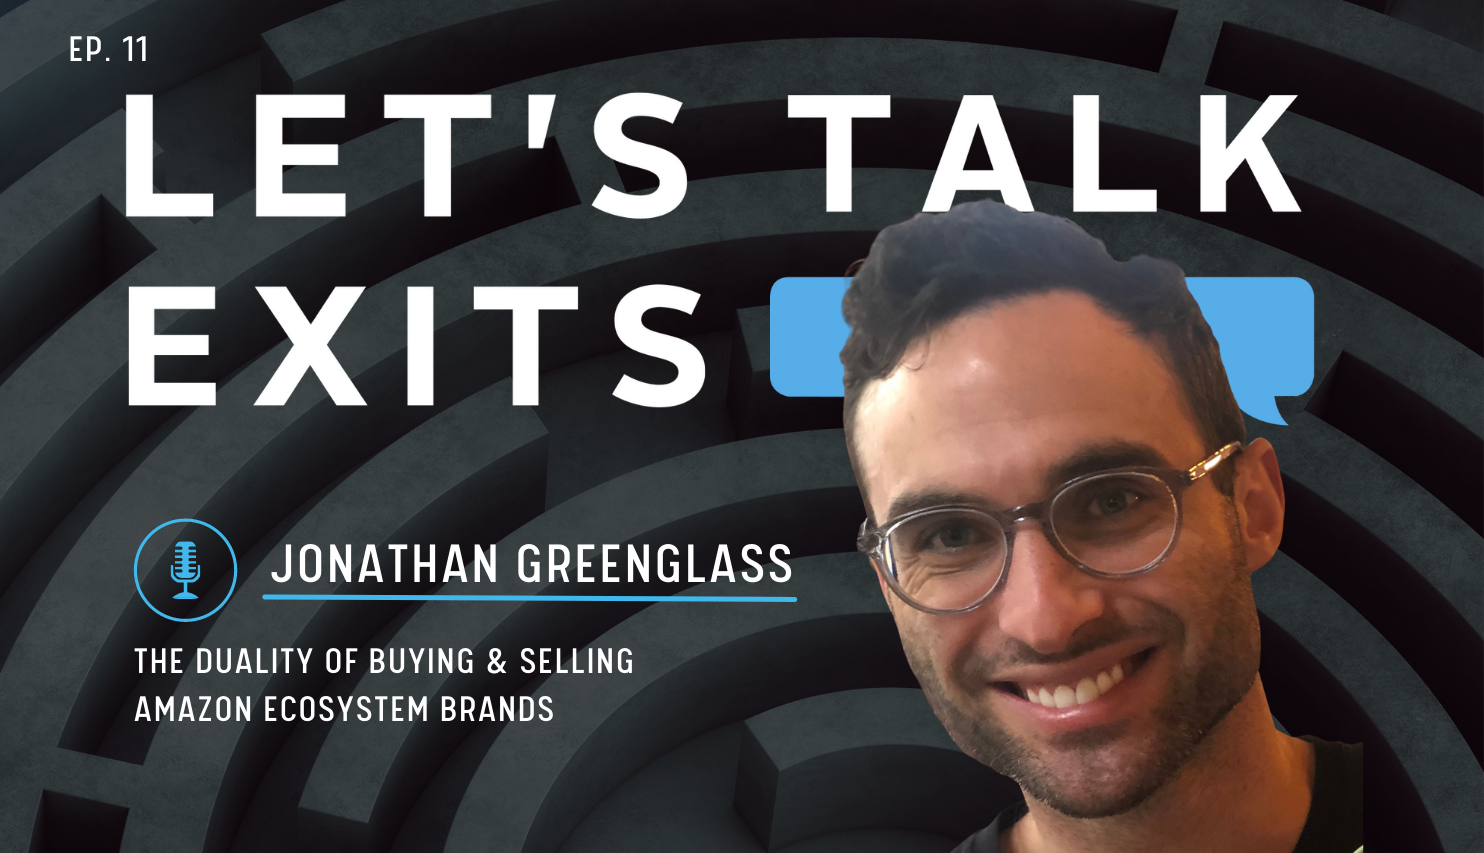 The Duality of Buying & Selling Amazon Ecosystem Brands with Jonathan Greenglass